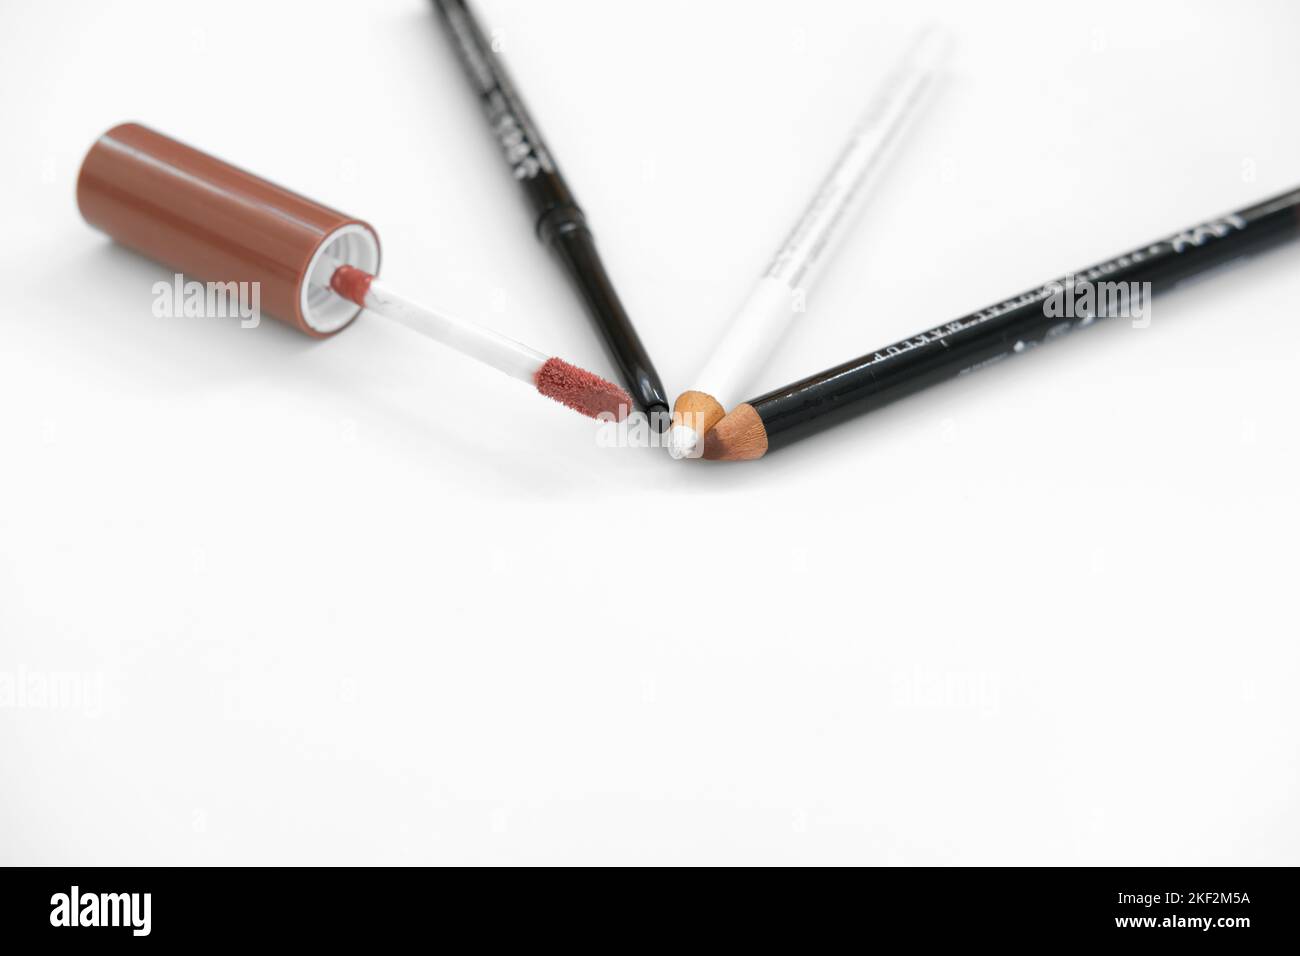 Lip gloss brush, brown lip pencil, black eye pencil and white eyeliner pencil on a white background; lips and eye makeup and cosmetics. Stock Photo